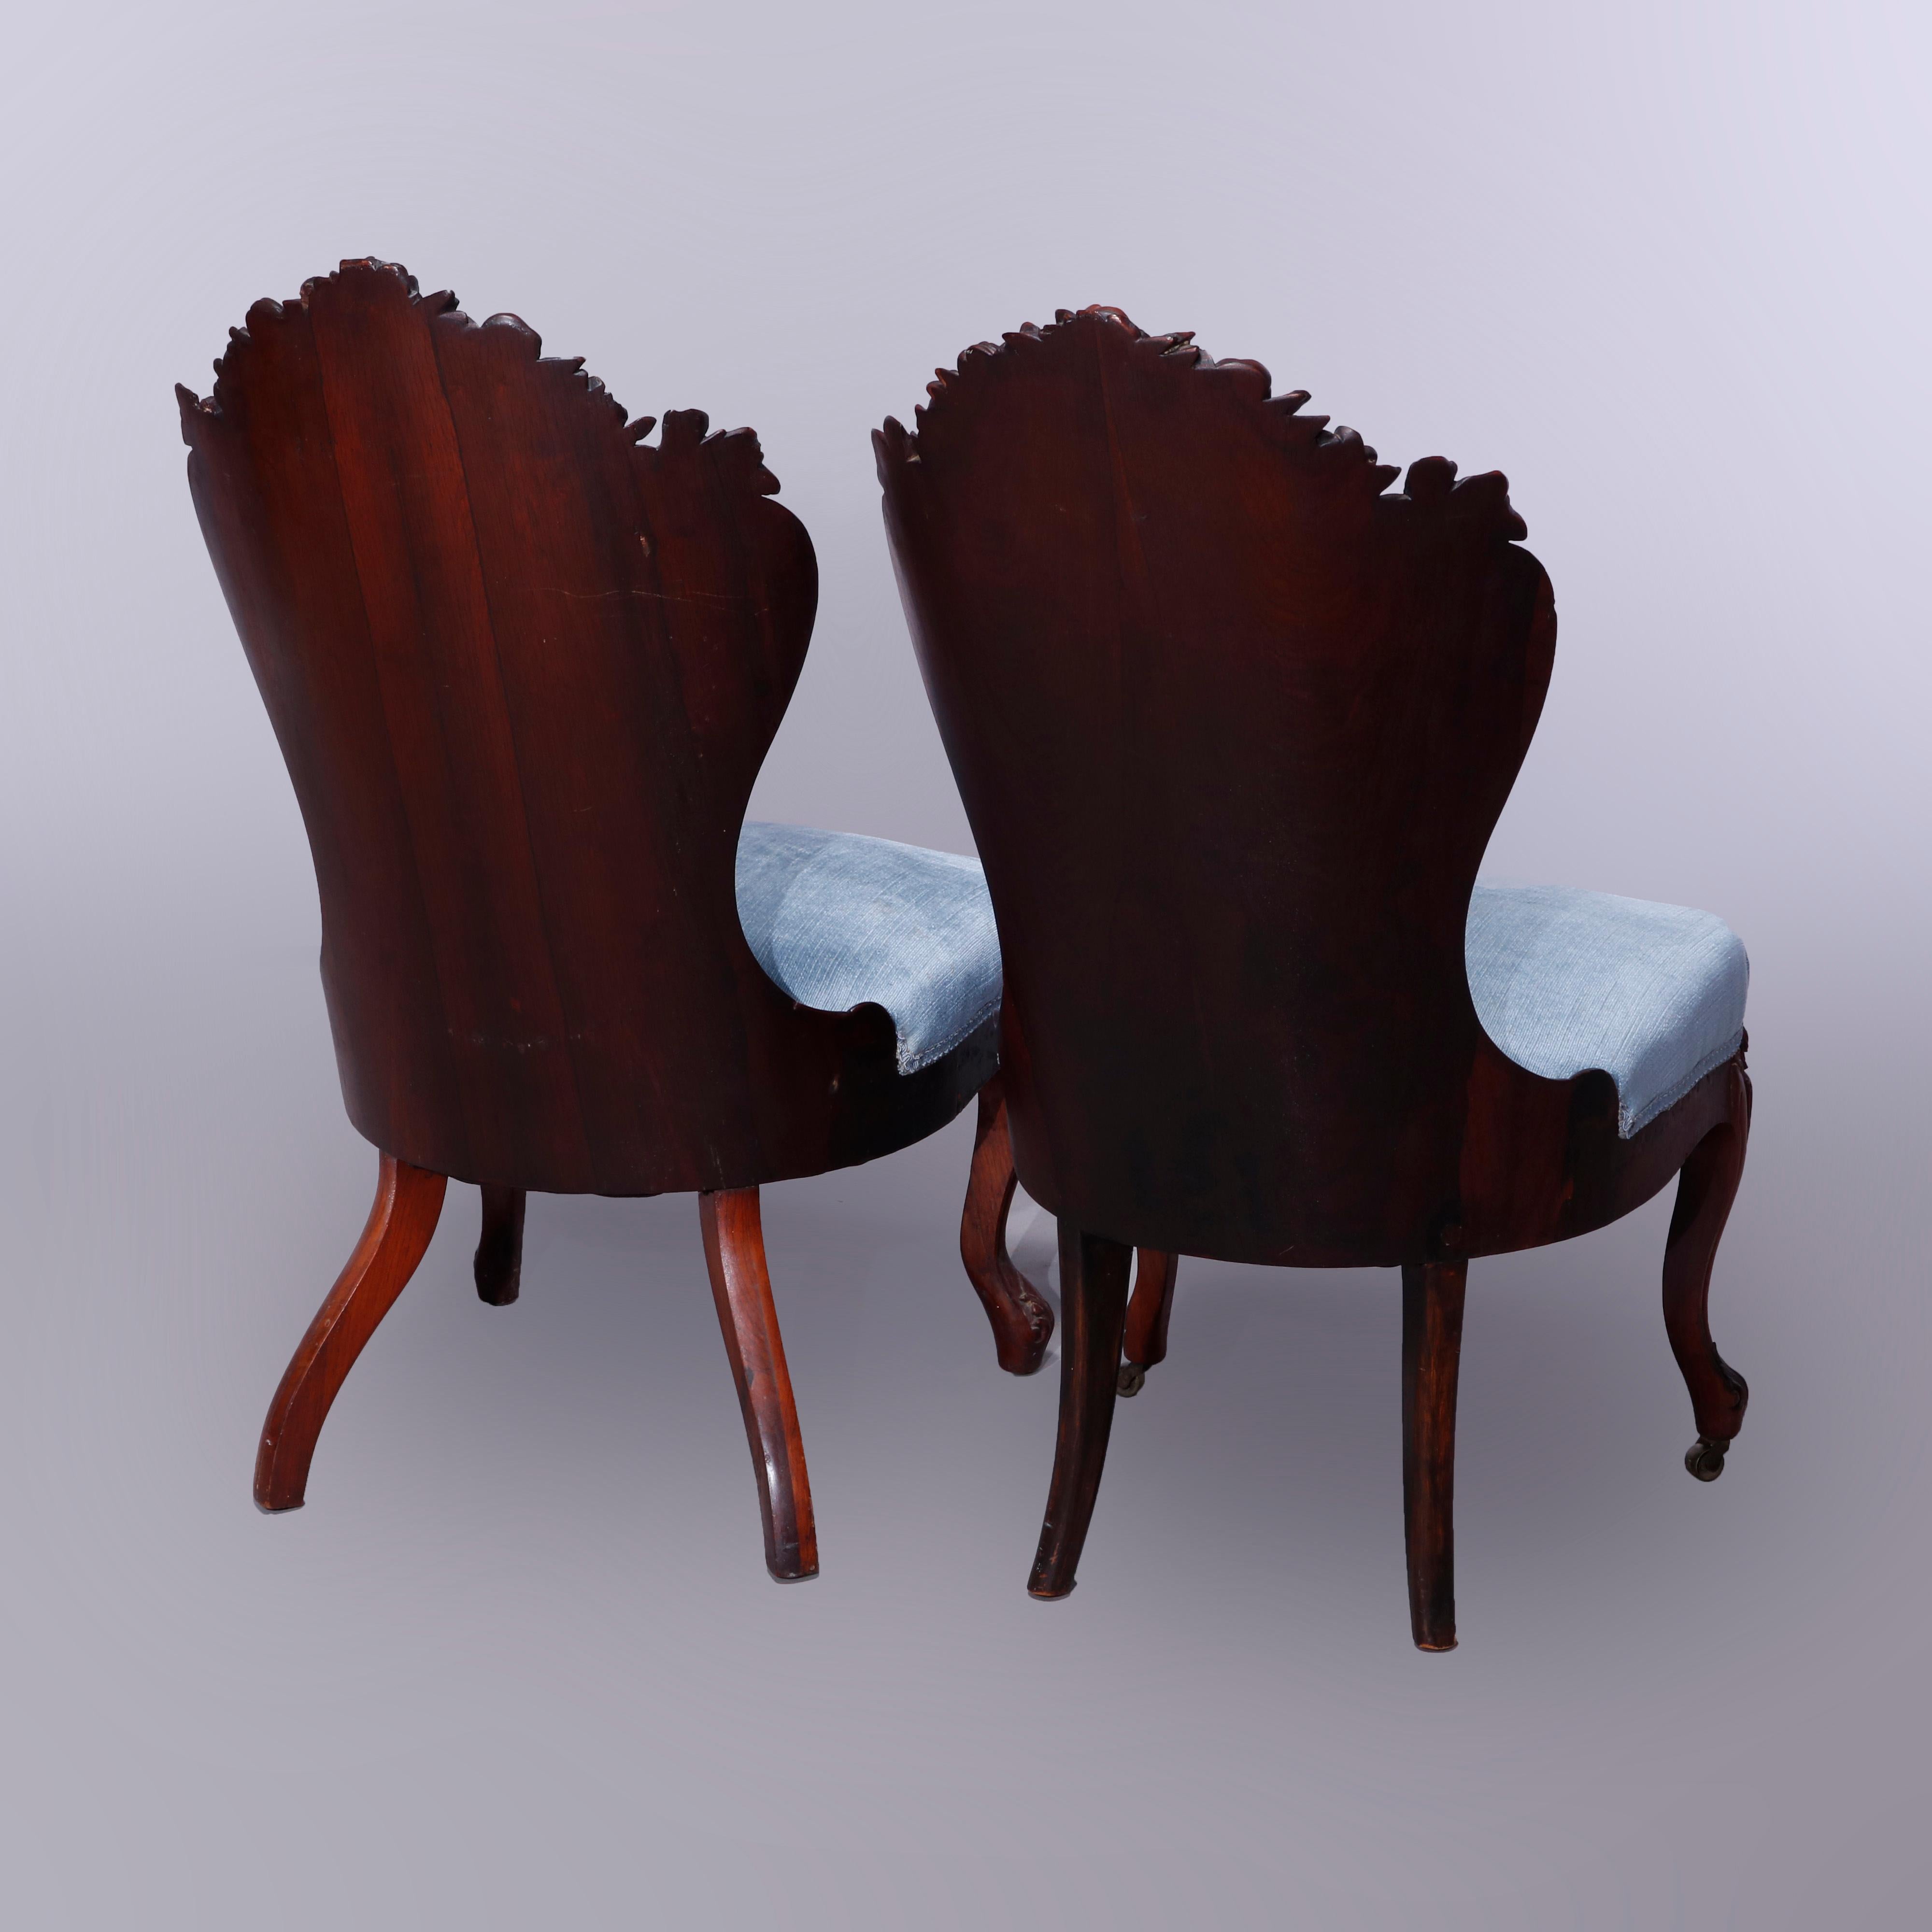 German Pair Rococo Revival Belter Rosalie Laminated Rosewood Side Chairs, c1860